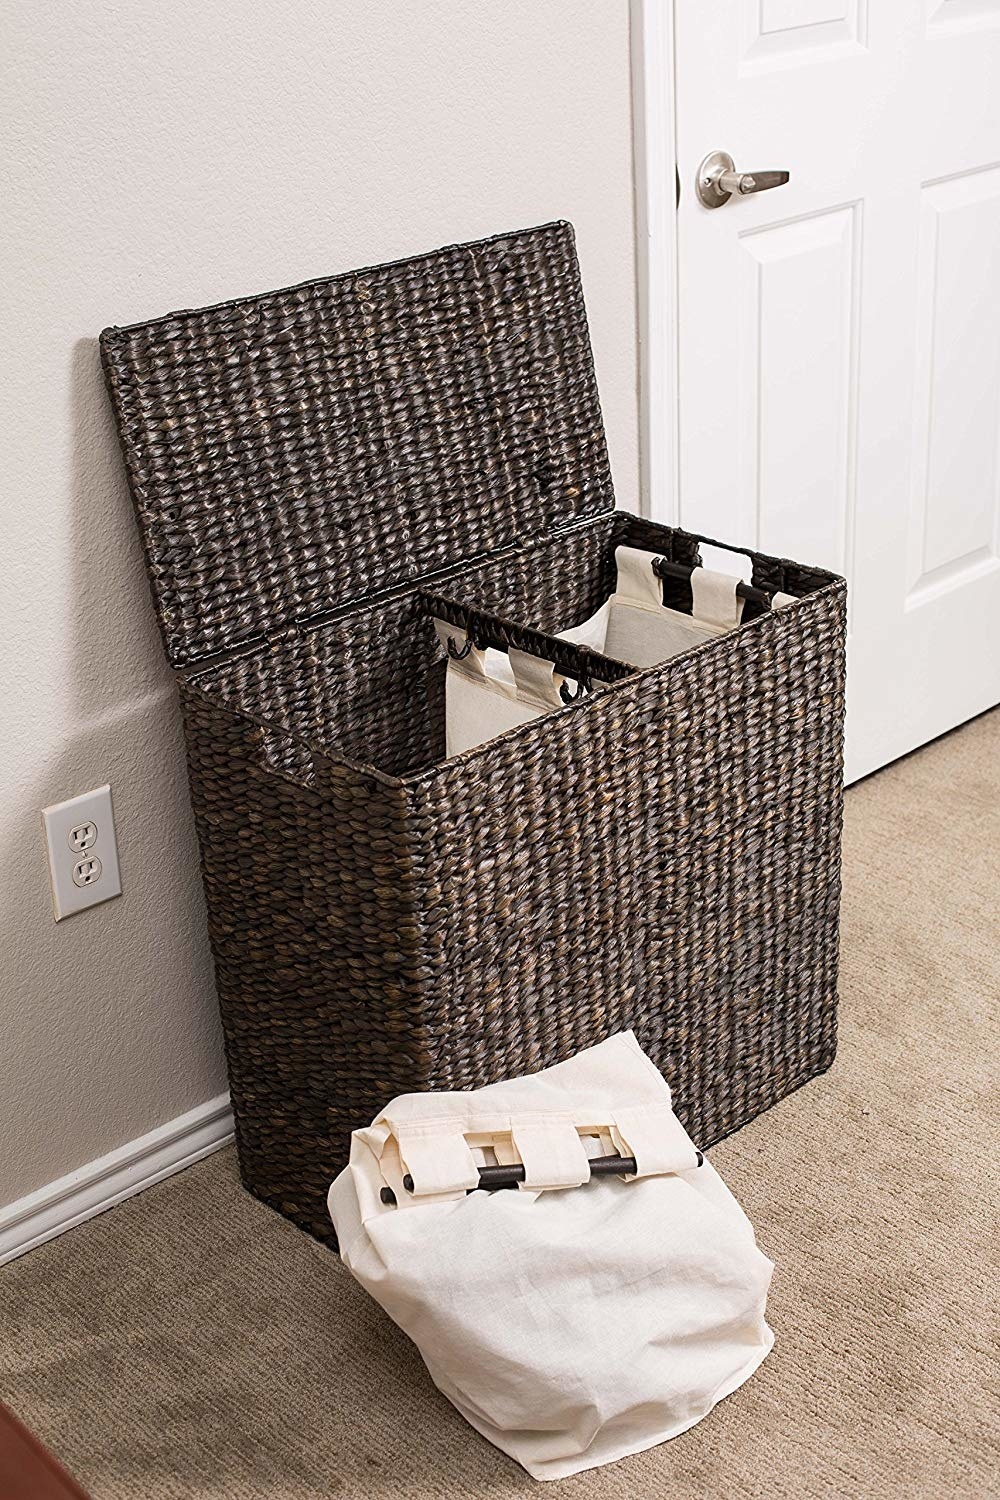 3 Sections Divided Hampers Handwoven Synthetic Rattan Laundry Hamper with Lid and Handles Easy to Install Grey Greenstell Laundry Basket with 2 Removable Liner Bags & 5 Mesh Laundry Bag